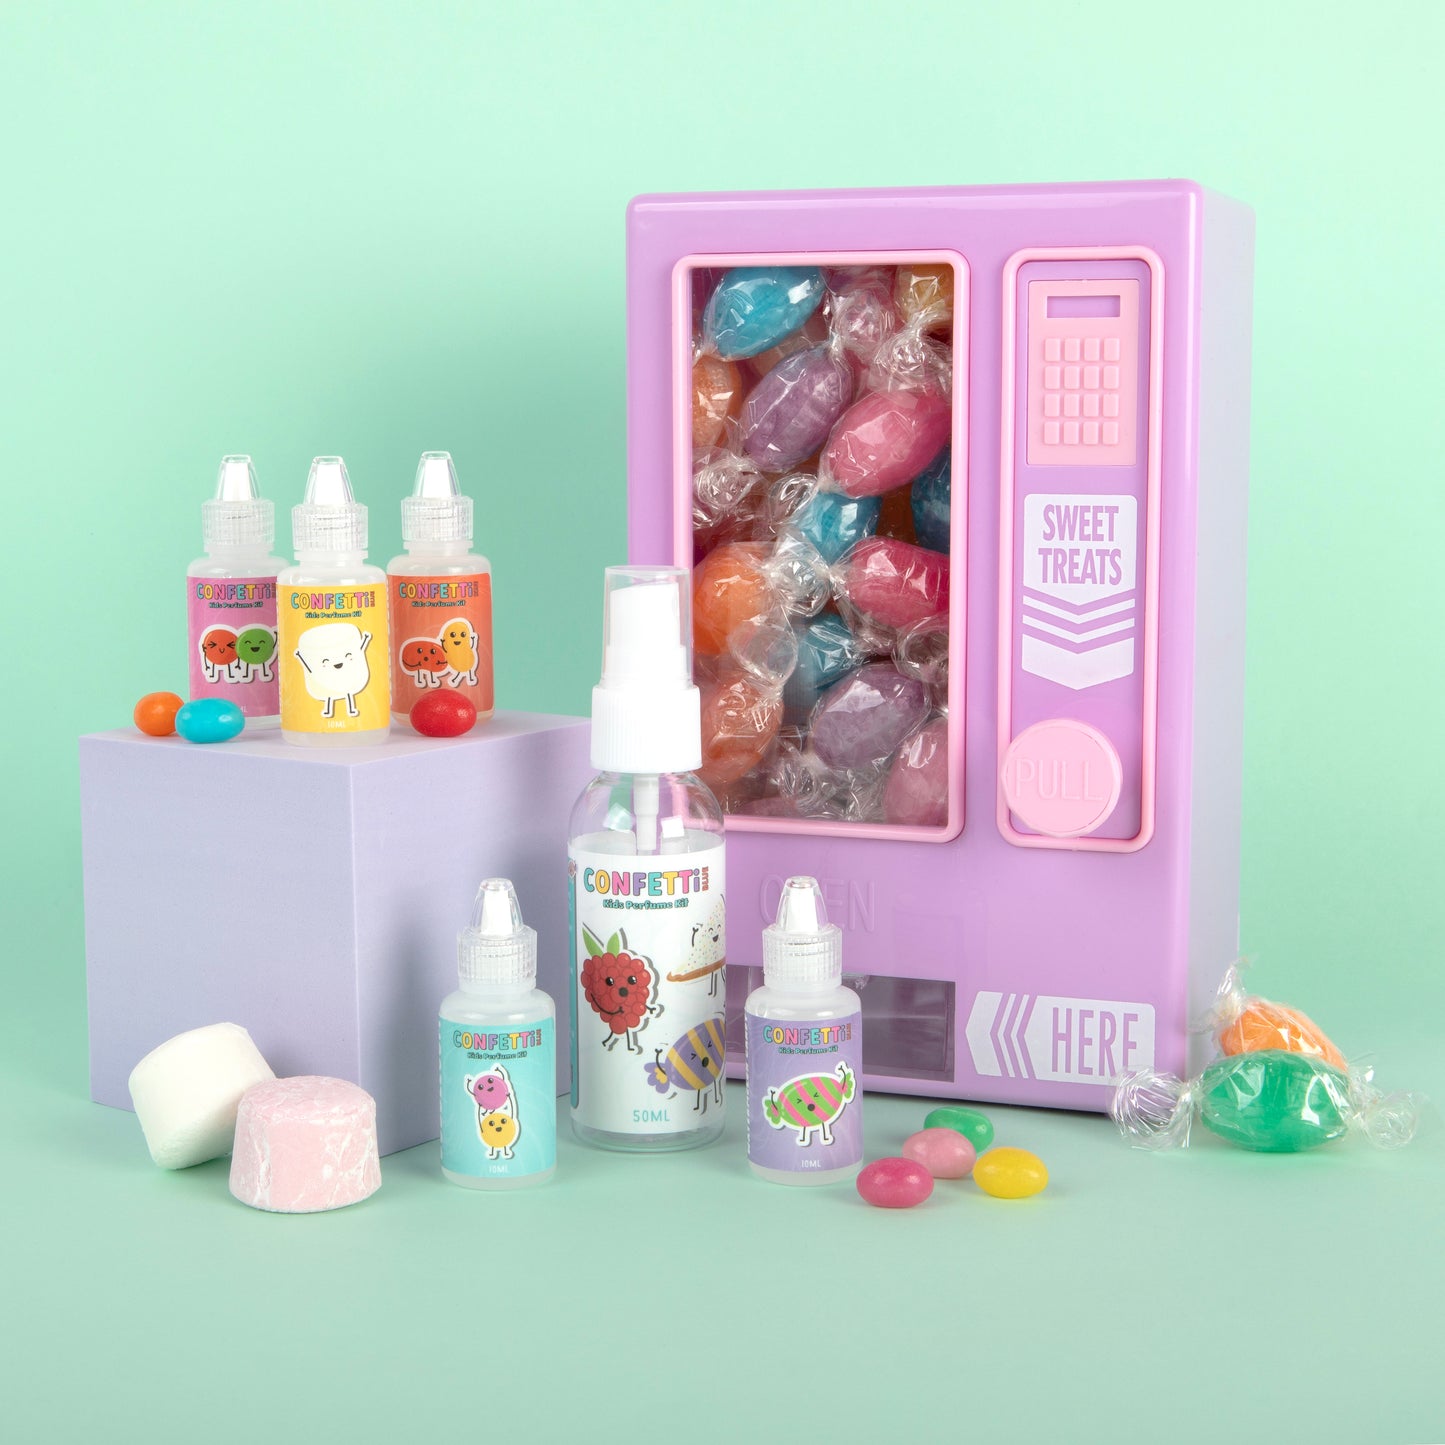 Candy Scented Perfume Making Kit